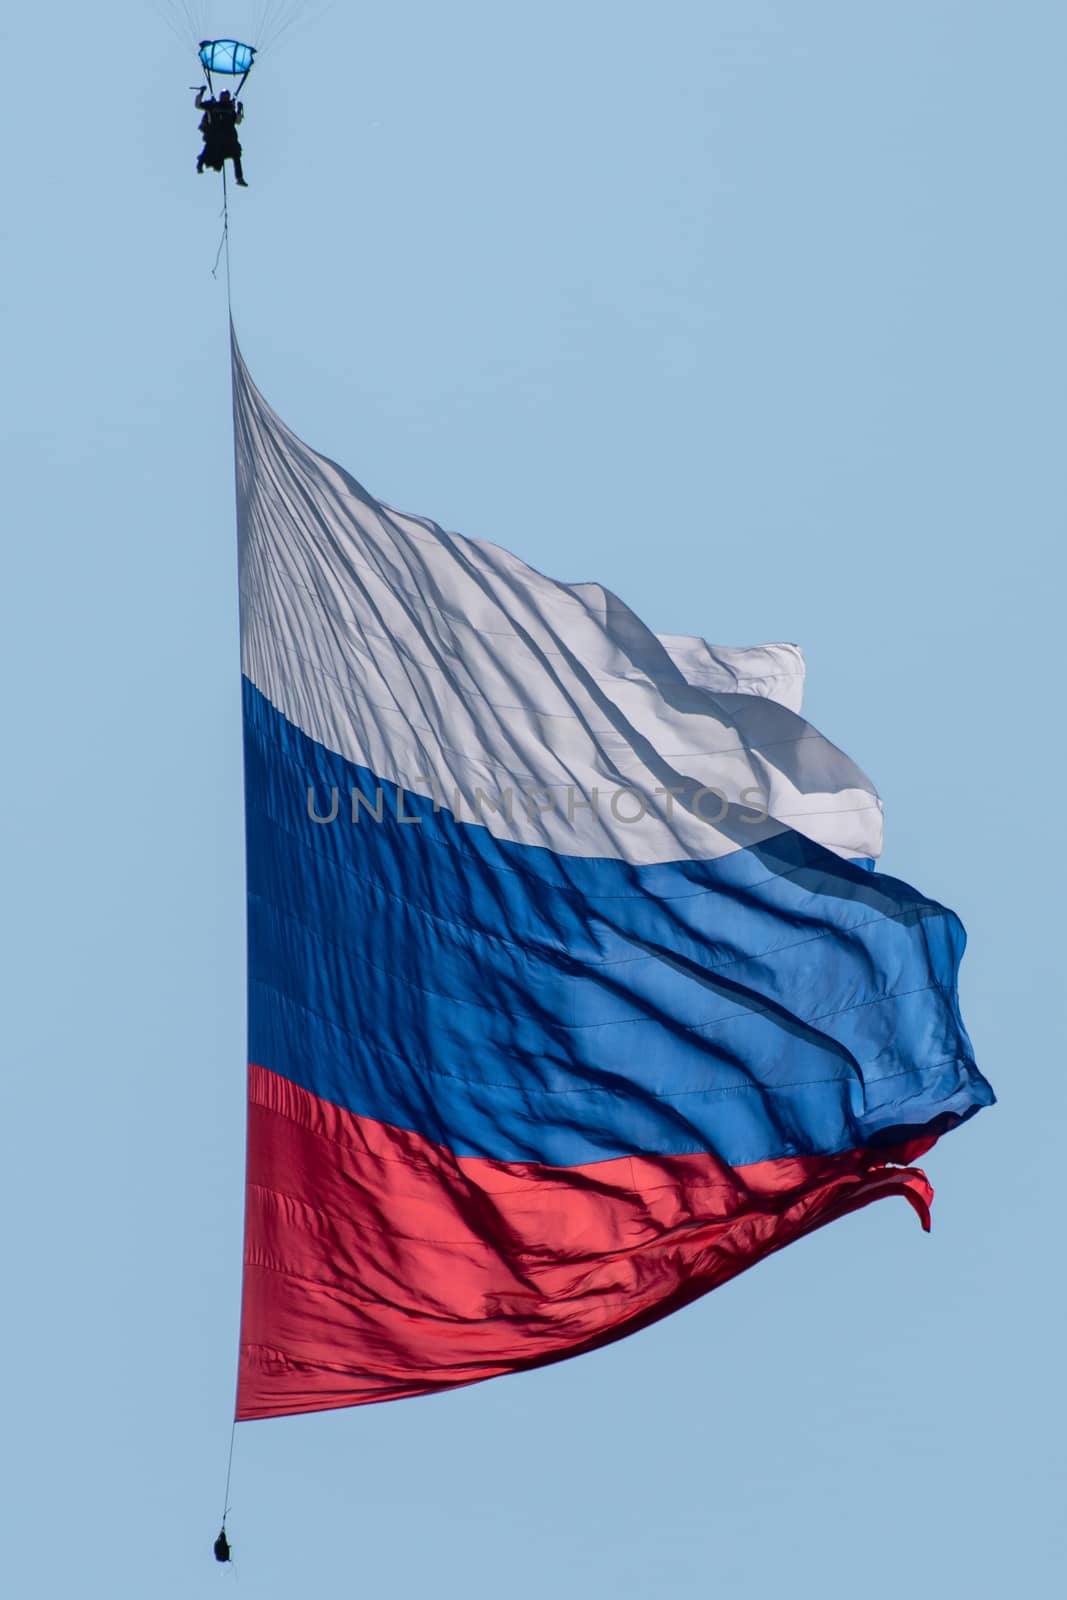 Skydiver in the sky with a giant flag of Russia against the blue sky.